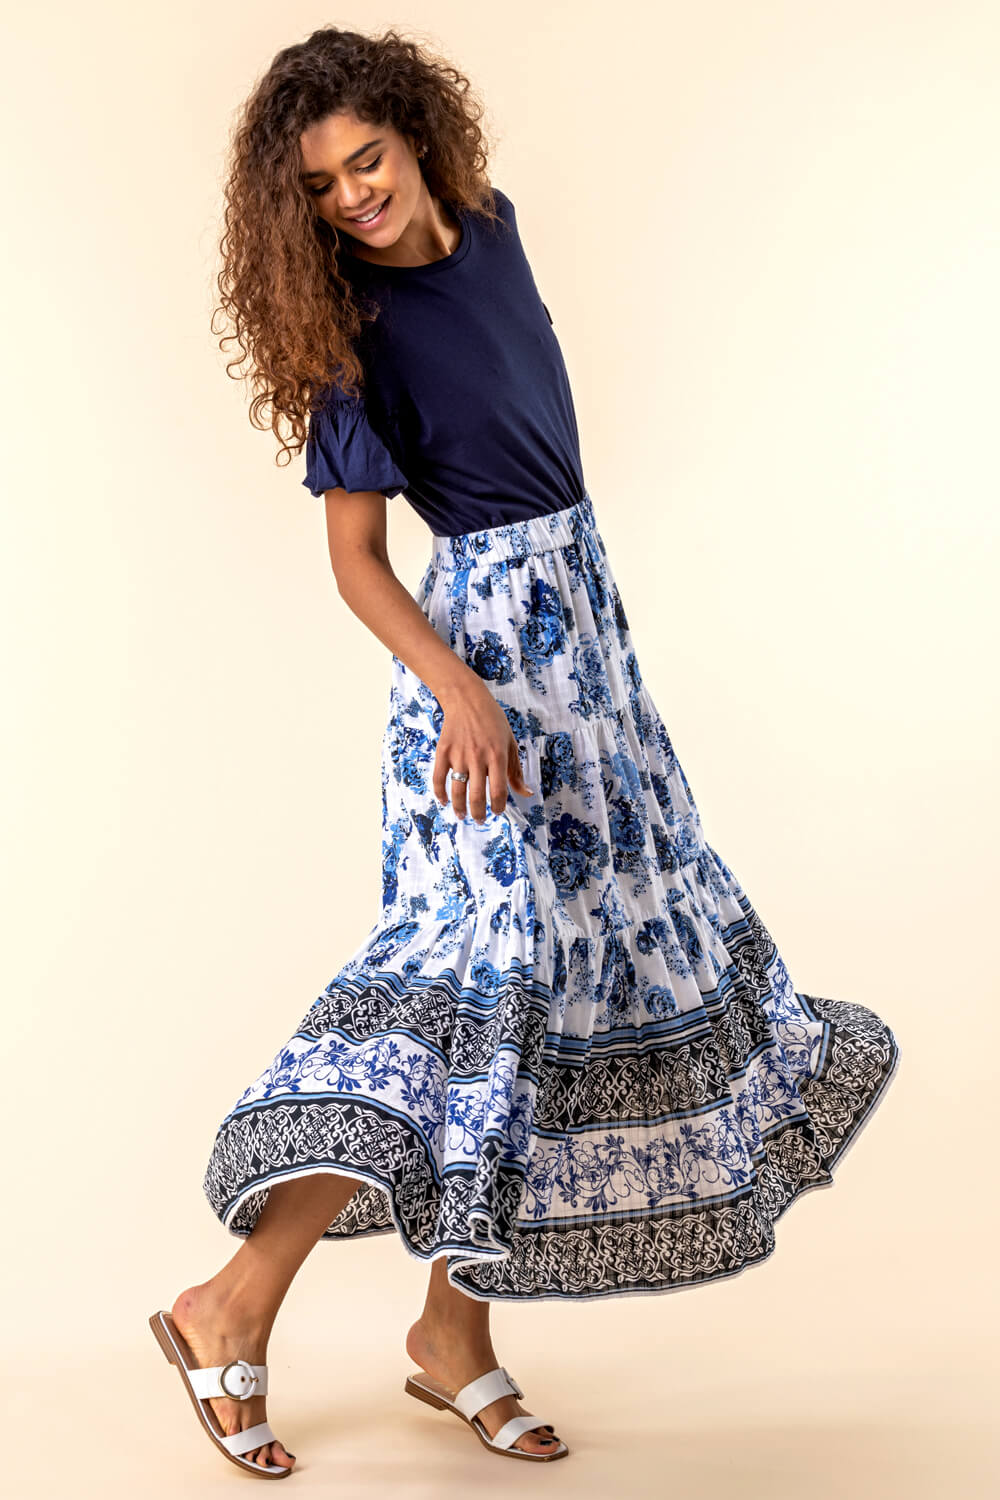 Blue Floral Contrast Print Tiered Cotton Skirt, Image 3 of 4